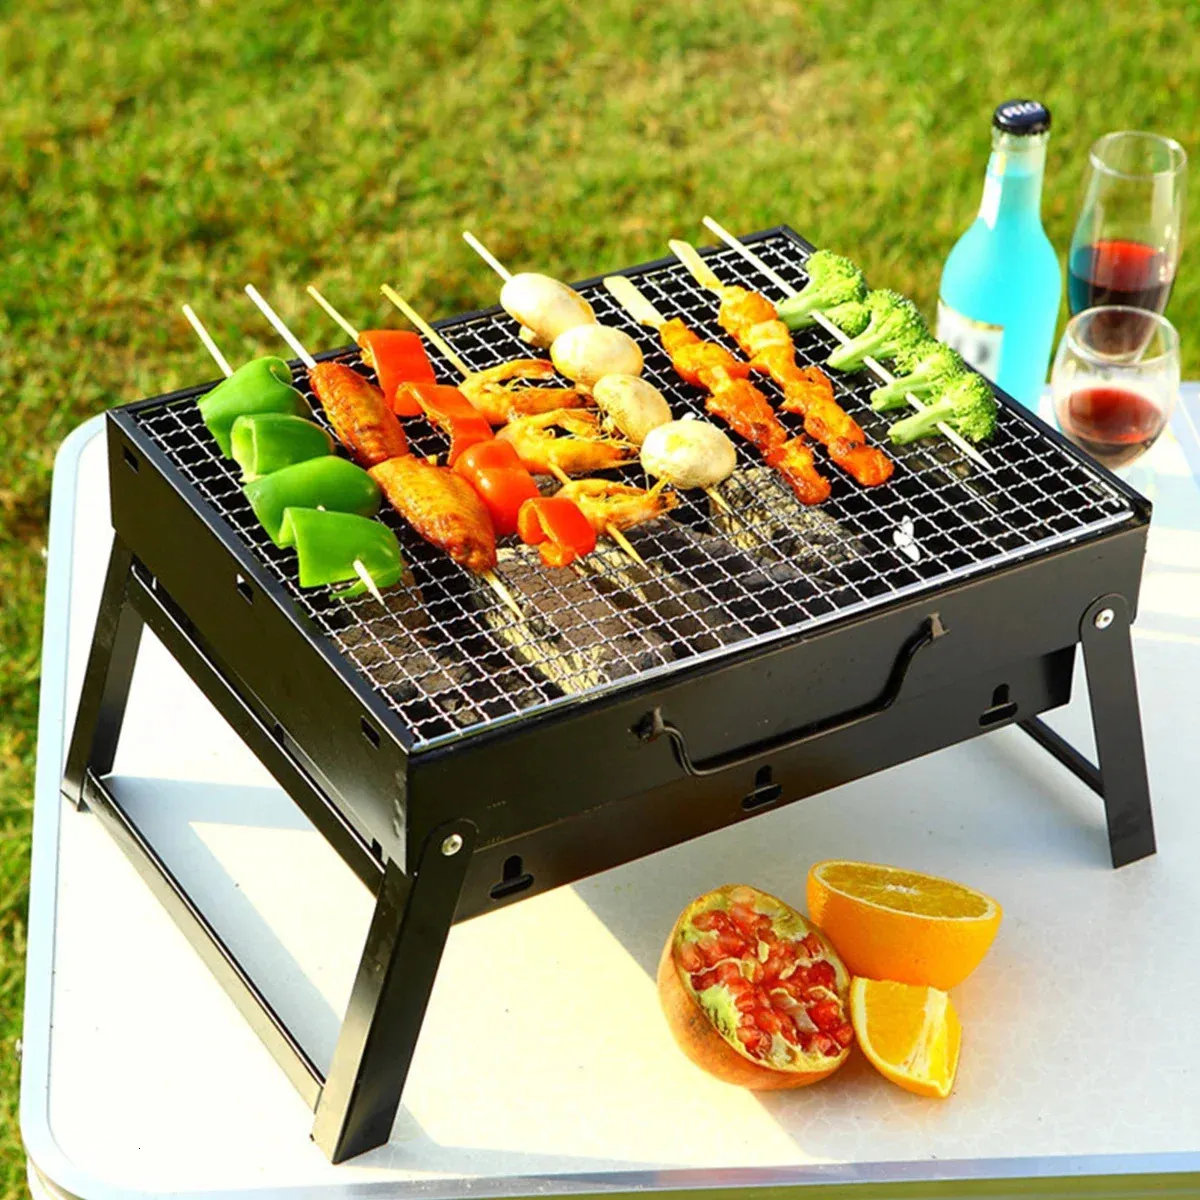 Barbecue Grill Portable Foldable Stainless Steel Wood Burning BBQ Stoves for Outdoor Camping Cooking Grills 240116